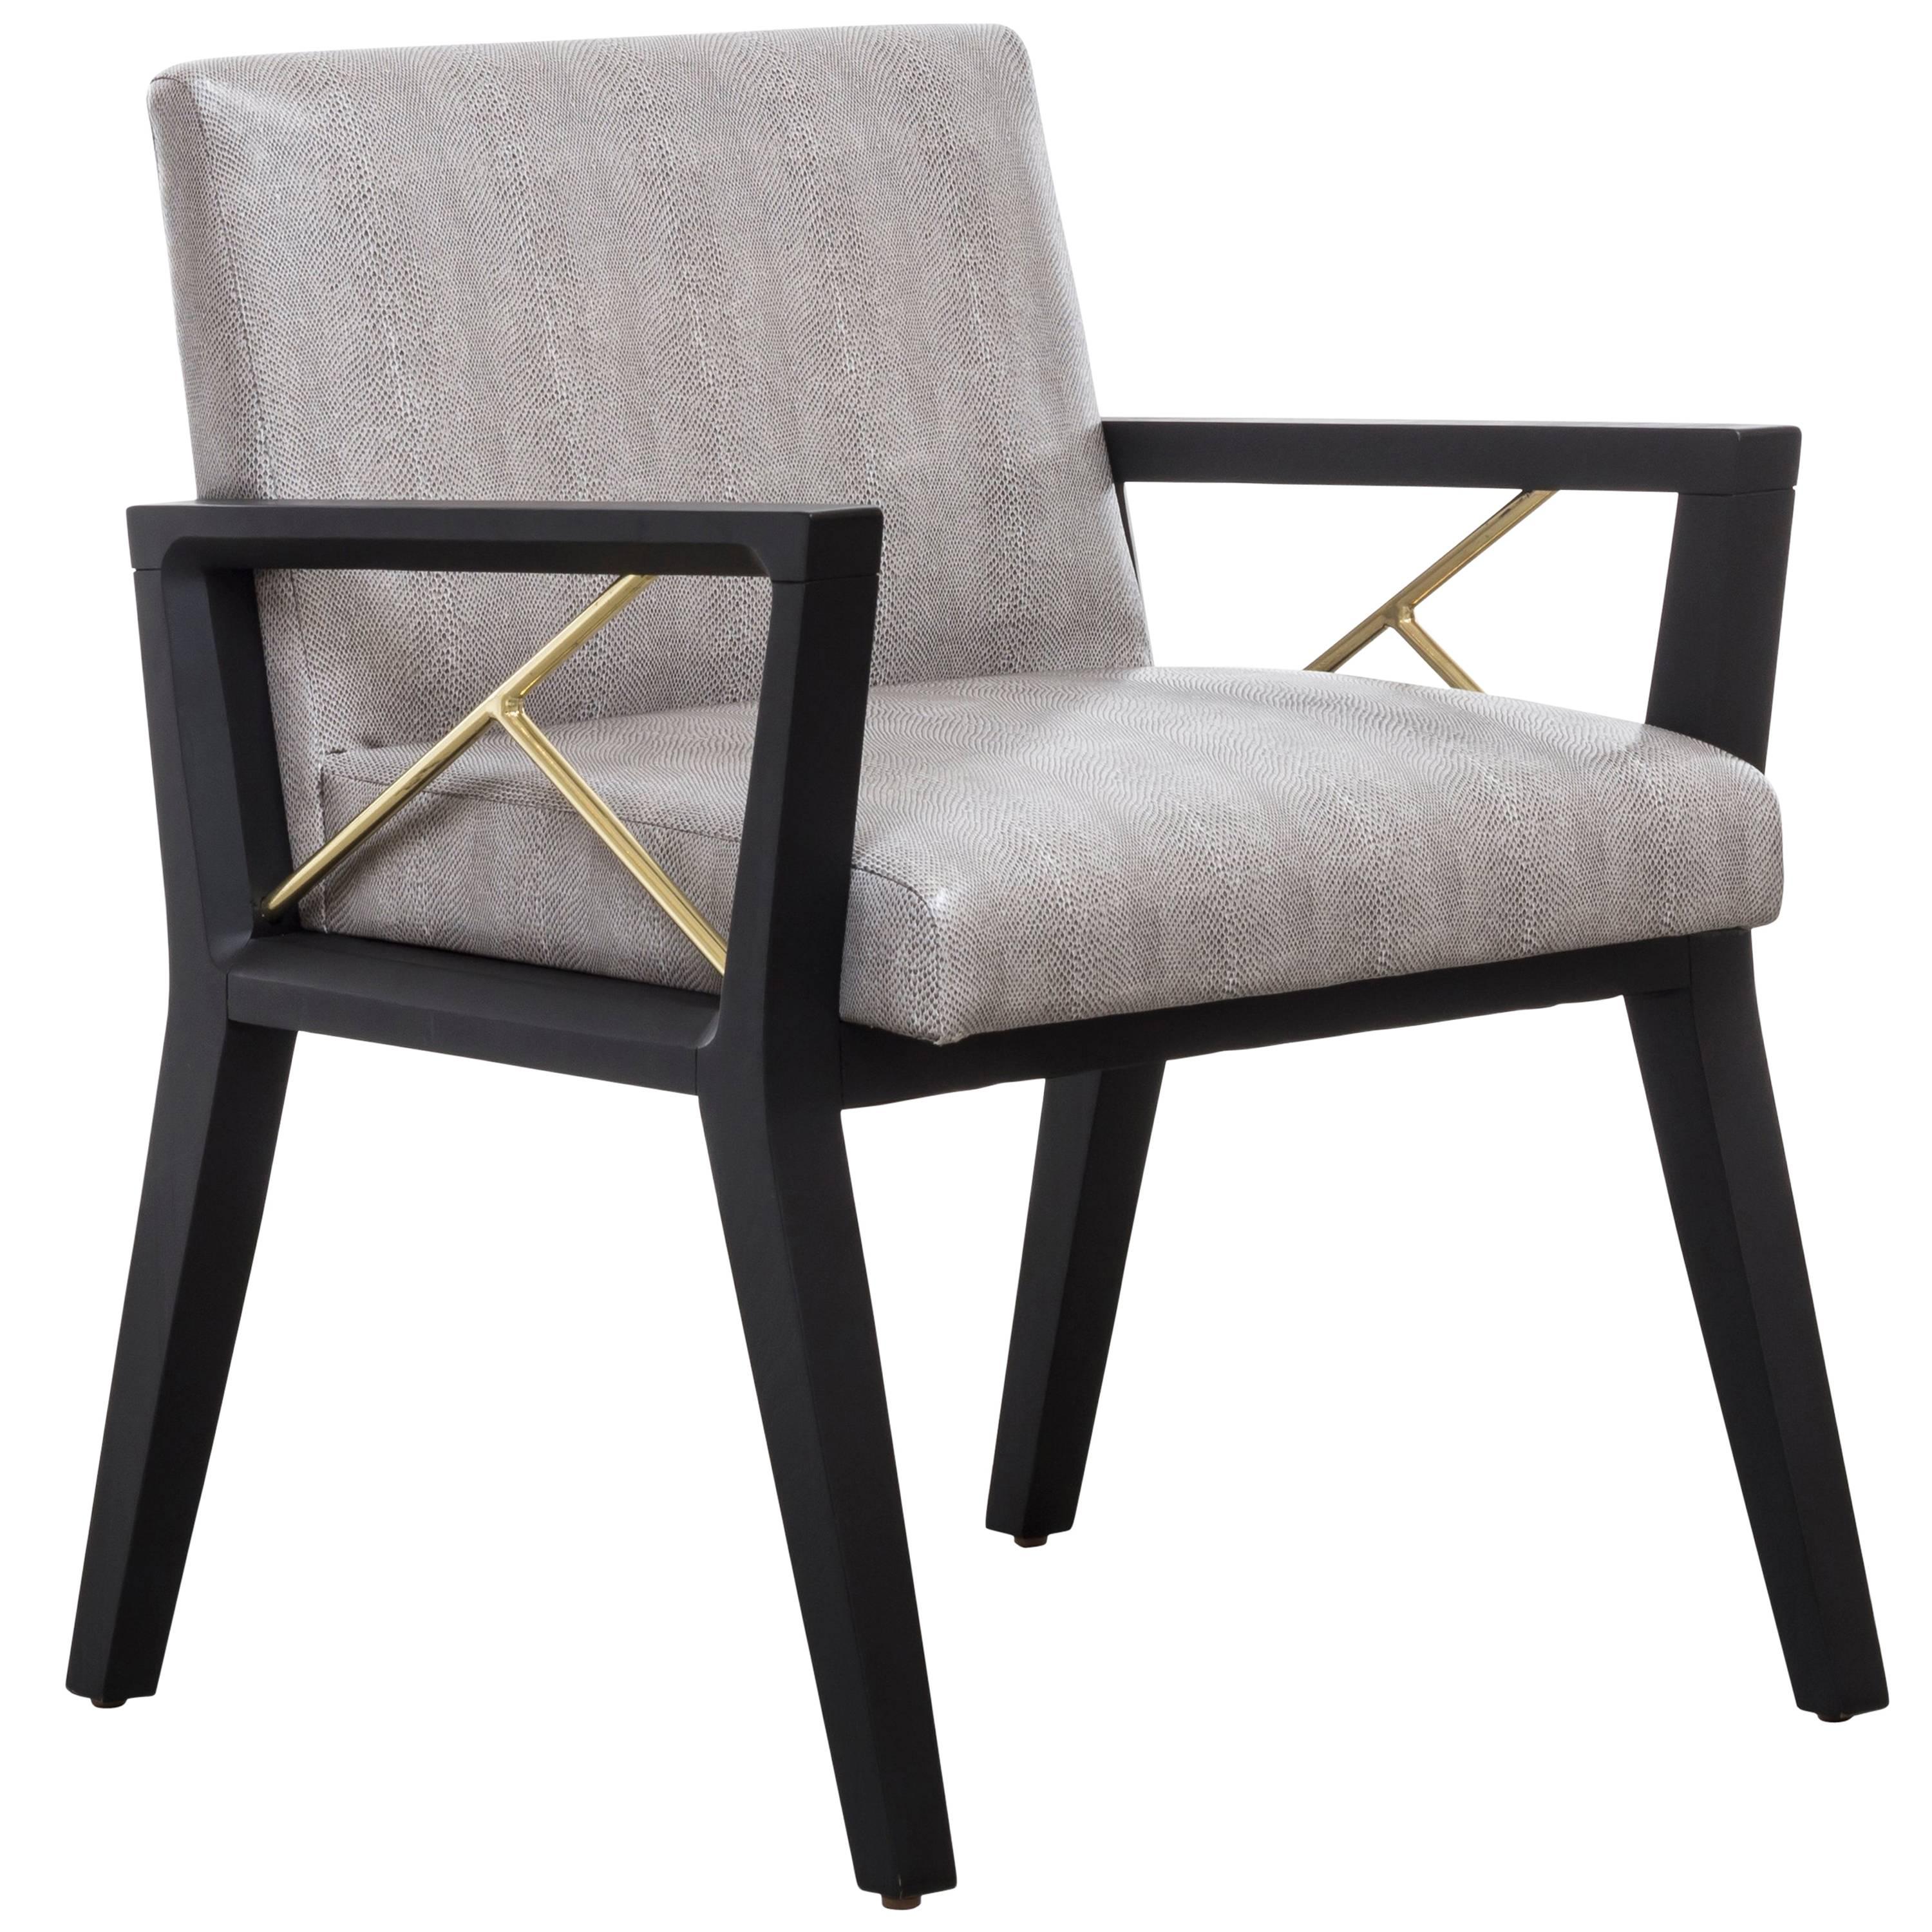 ANDRE CHAIR - Modern Dining Chair with Wood Frame and Brass Pole Detail